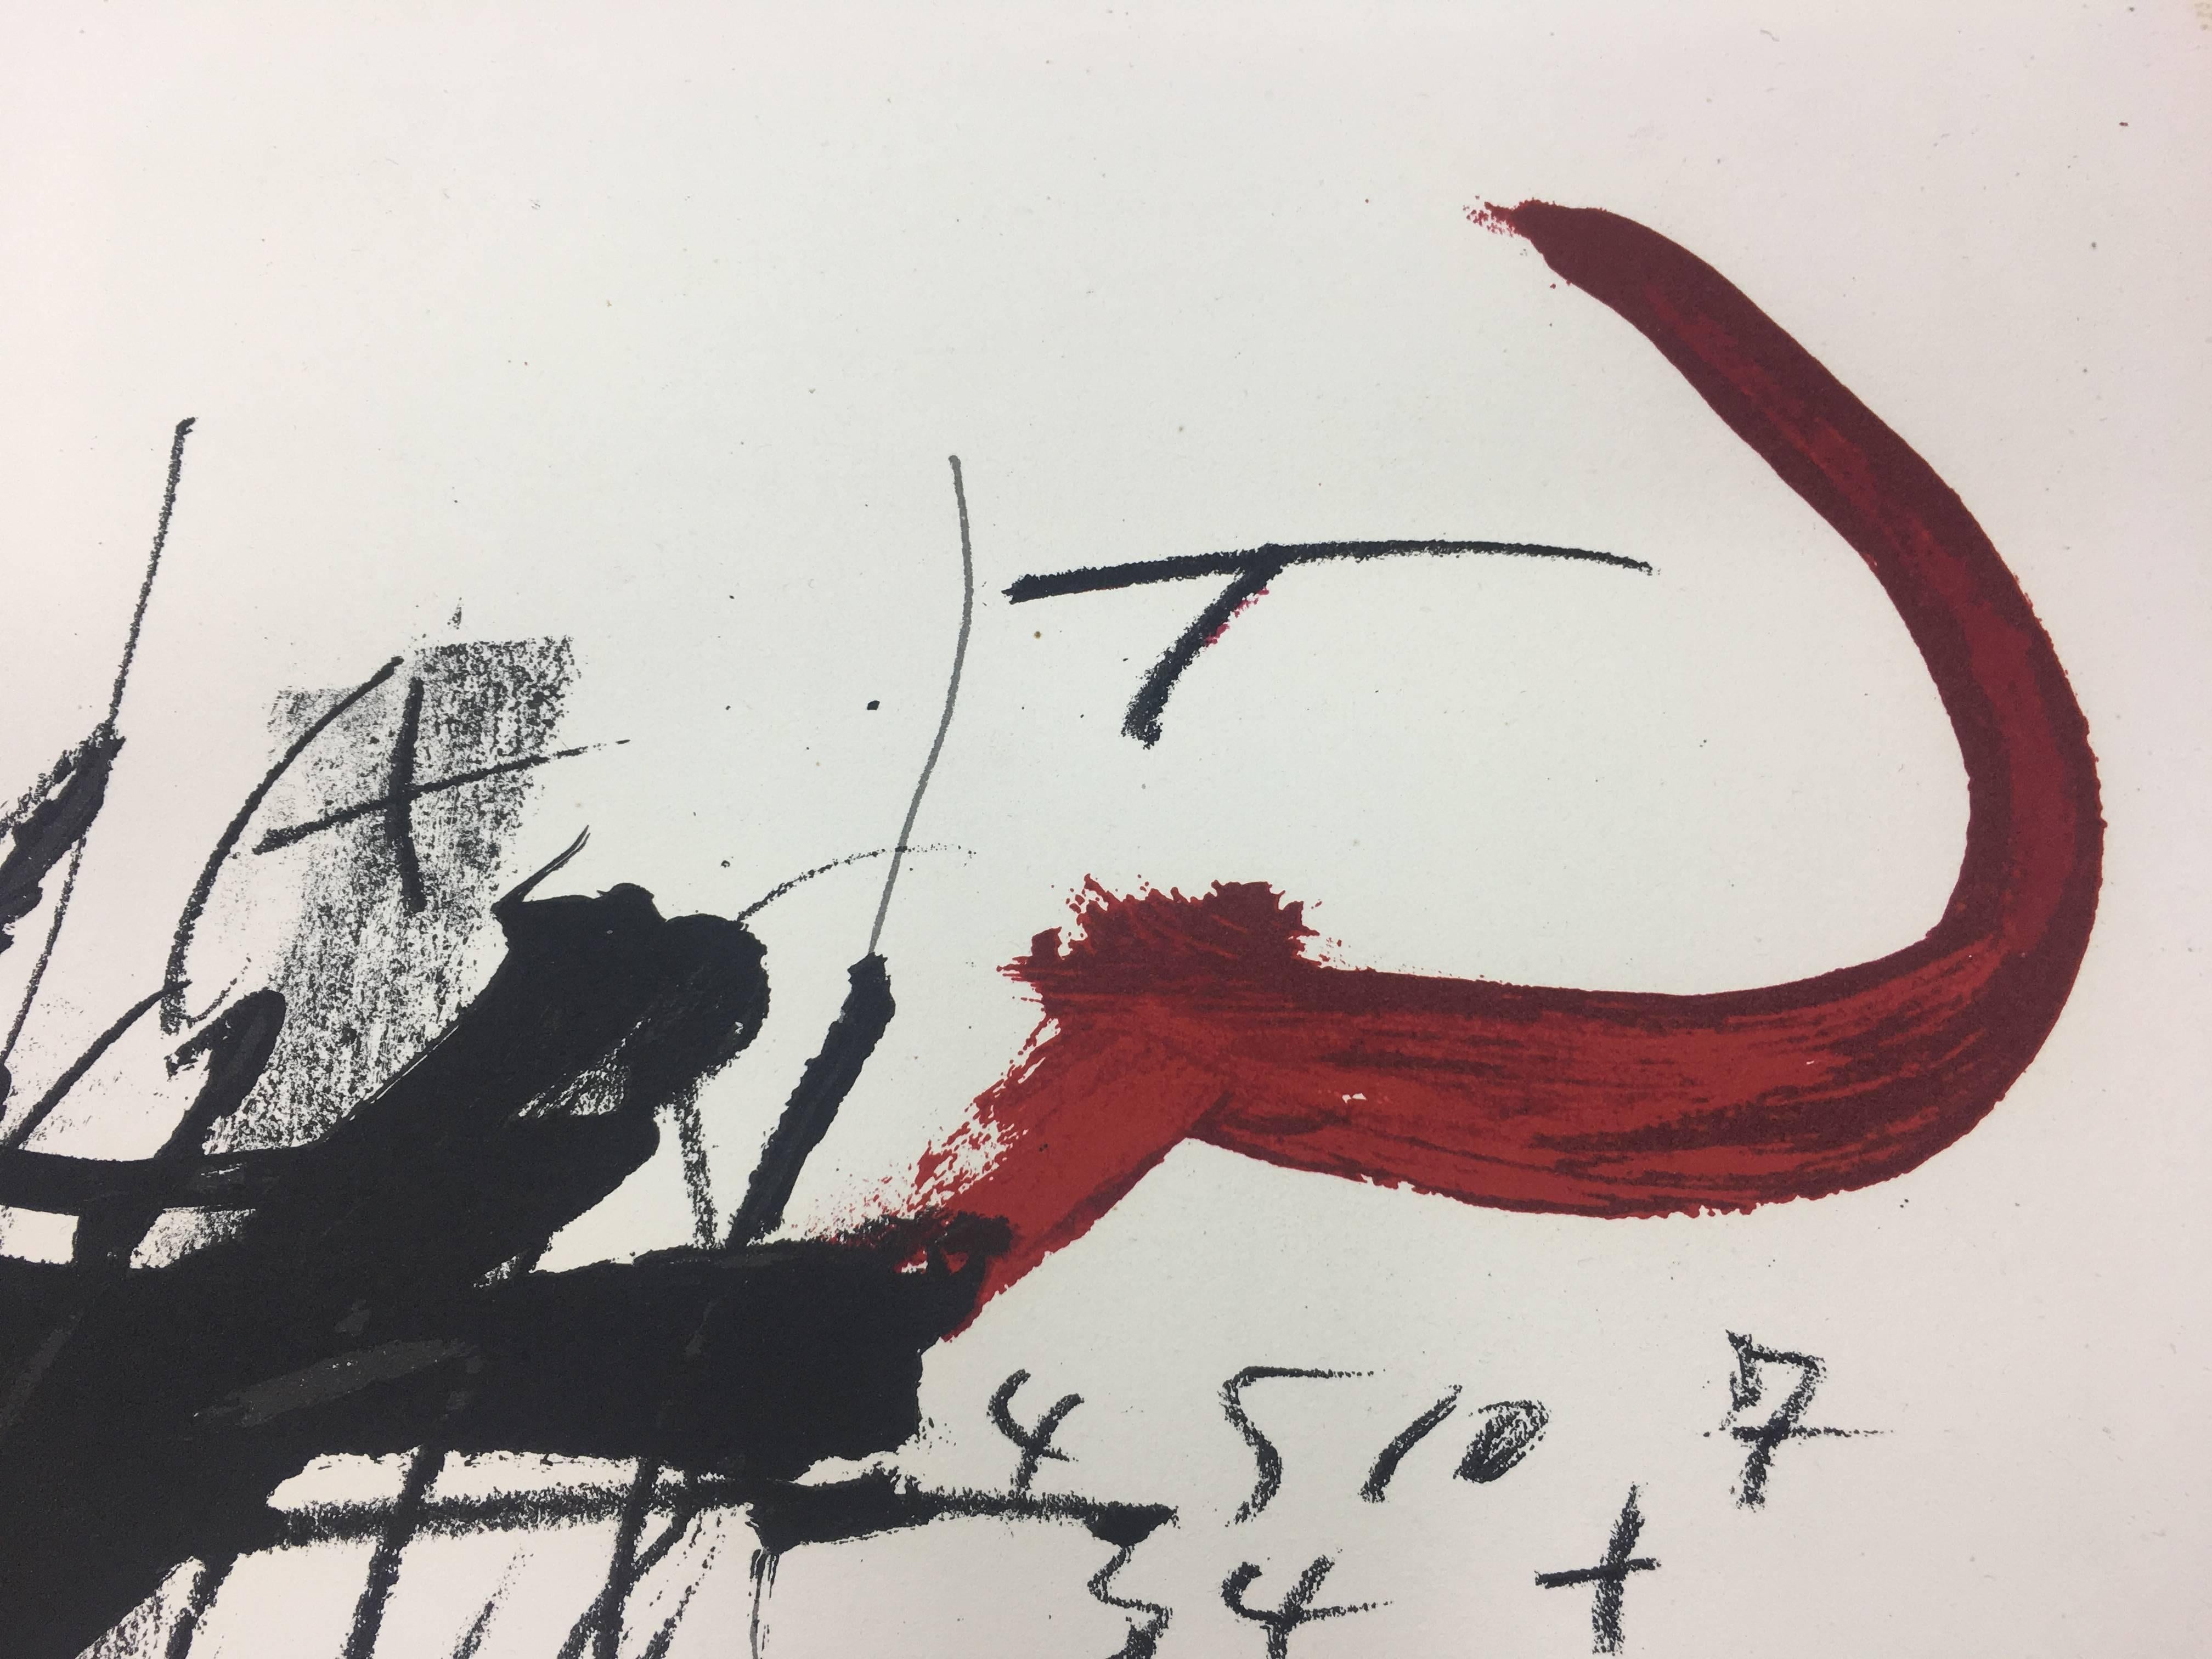 ANTONI TAPIES was the maximum representative of Spanish abstract art of the 20th century. His works are represented in museums and foundations around the world.
